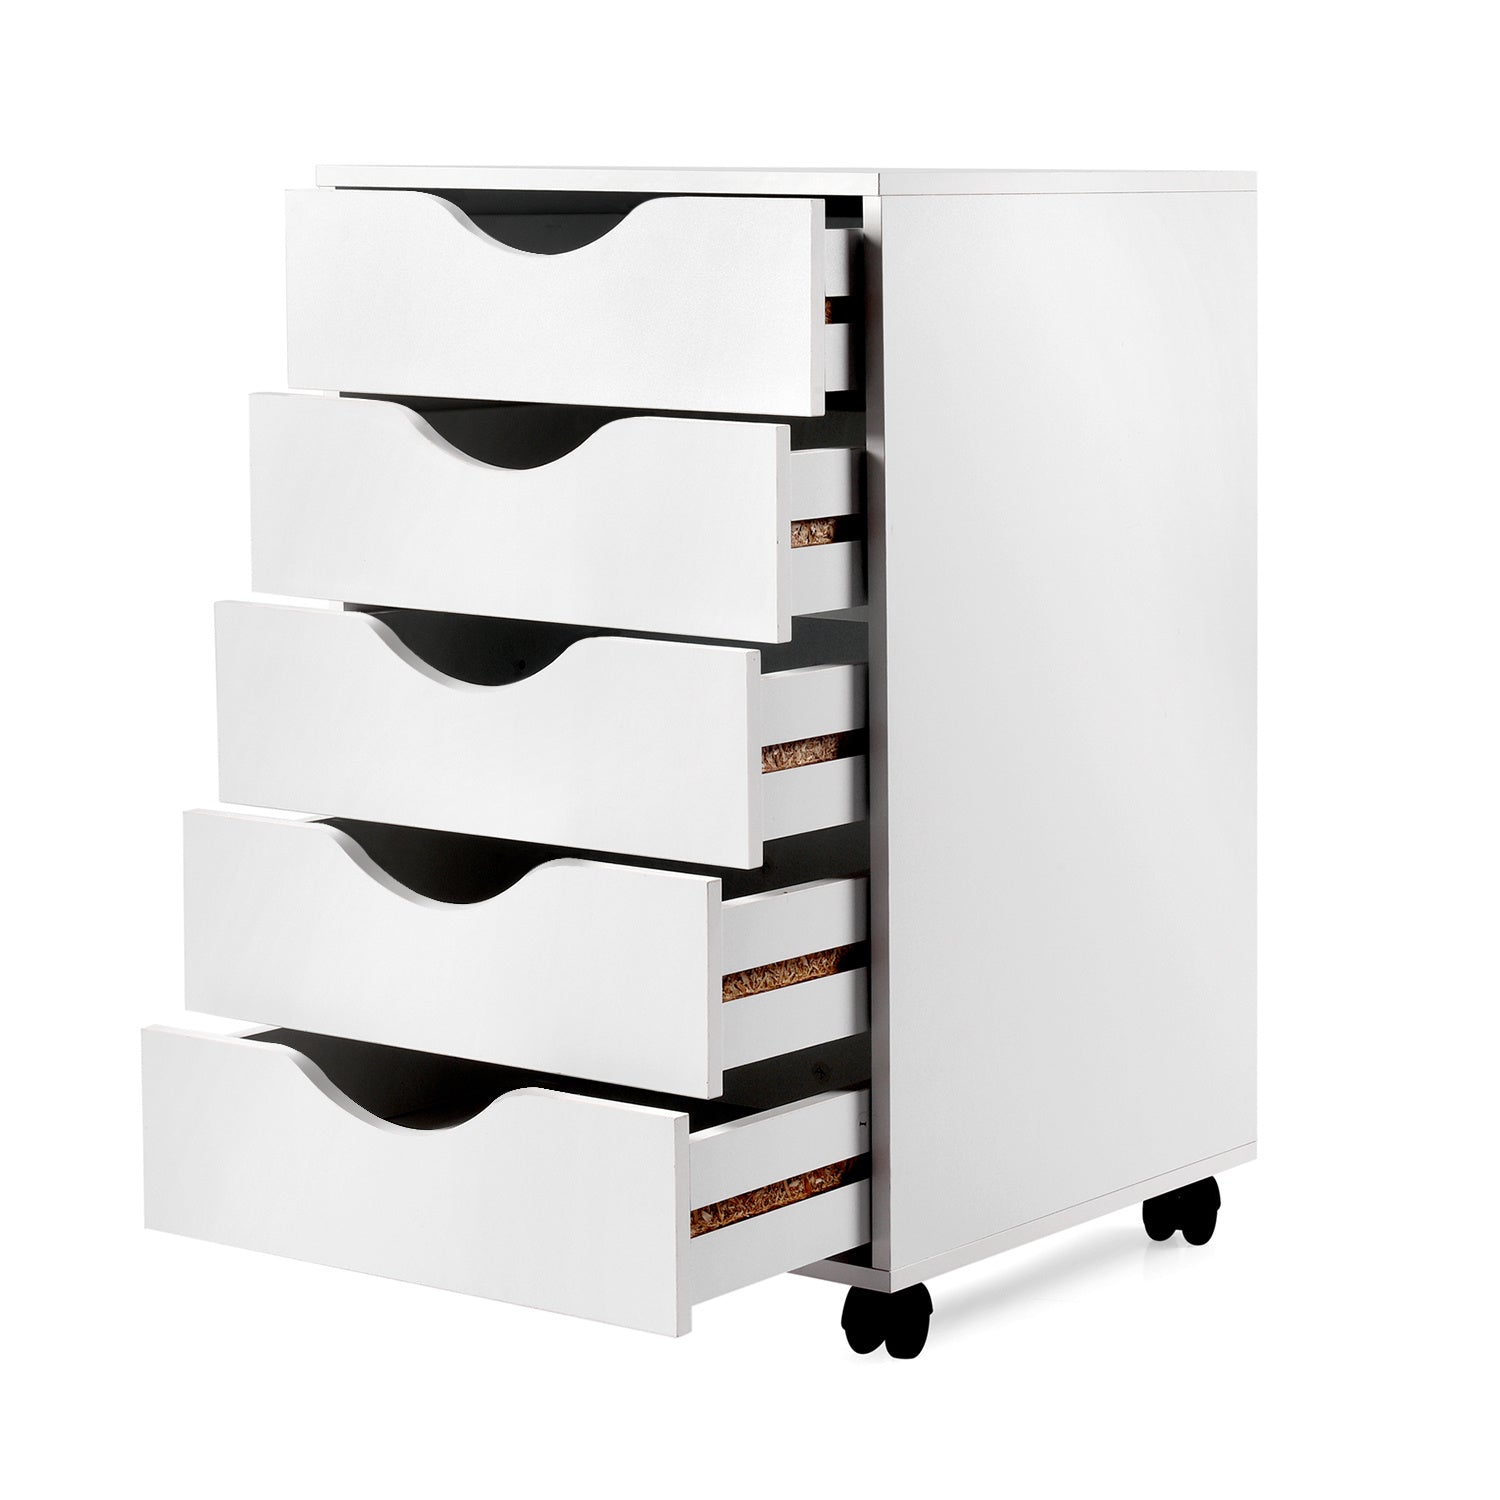 Mobile Filing Storage File Vertical Wood Cabinet with Wheel Lockable Casters, 5-Drawer, 24”H